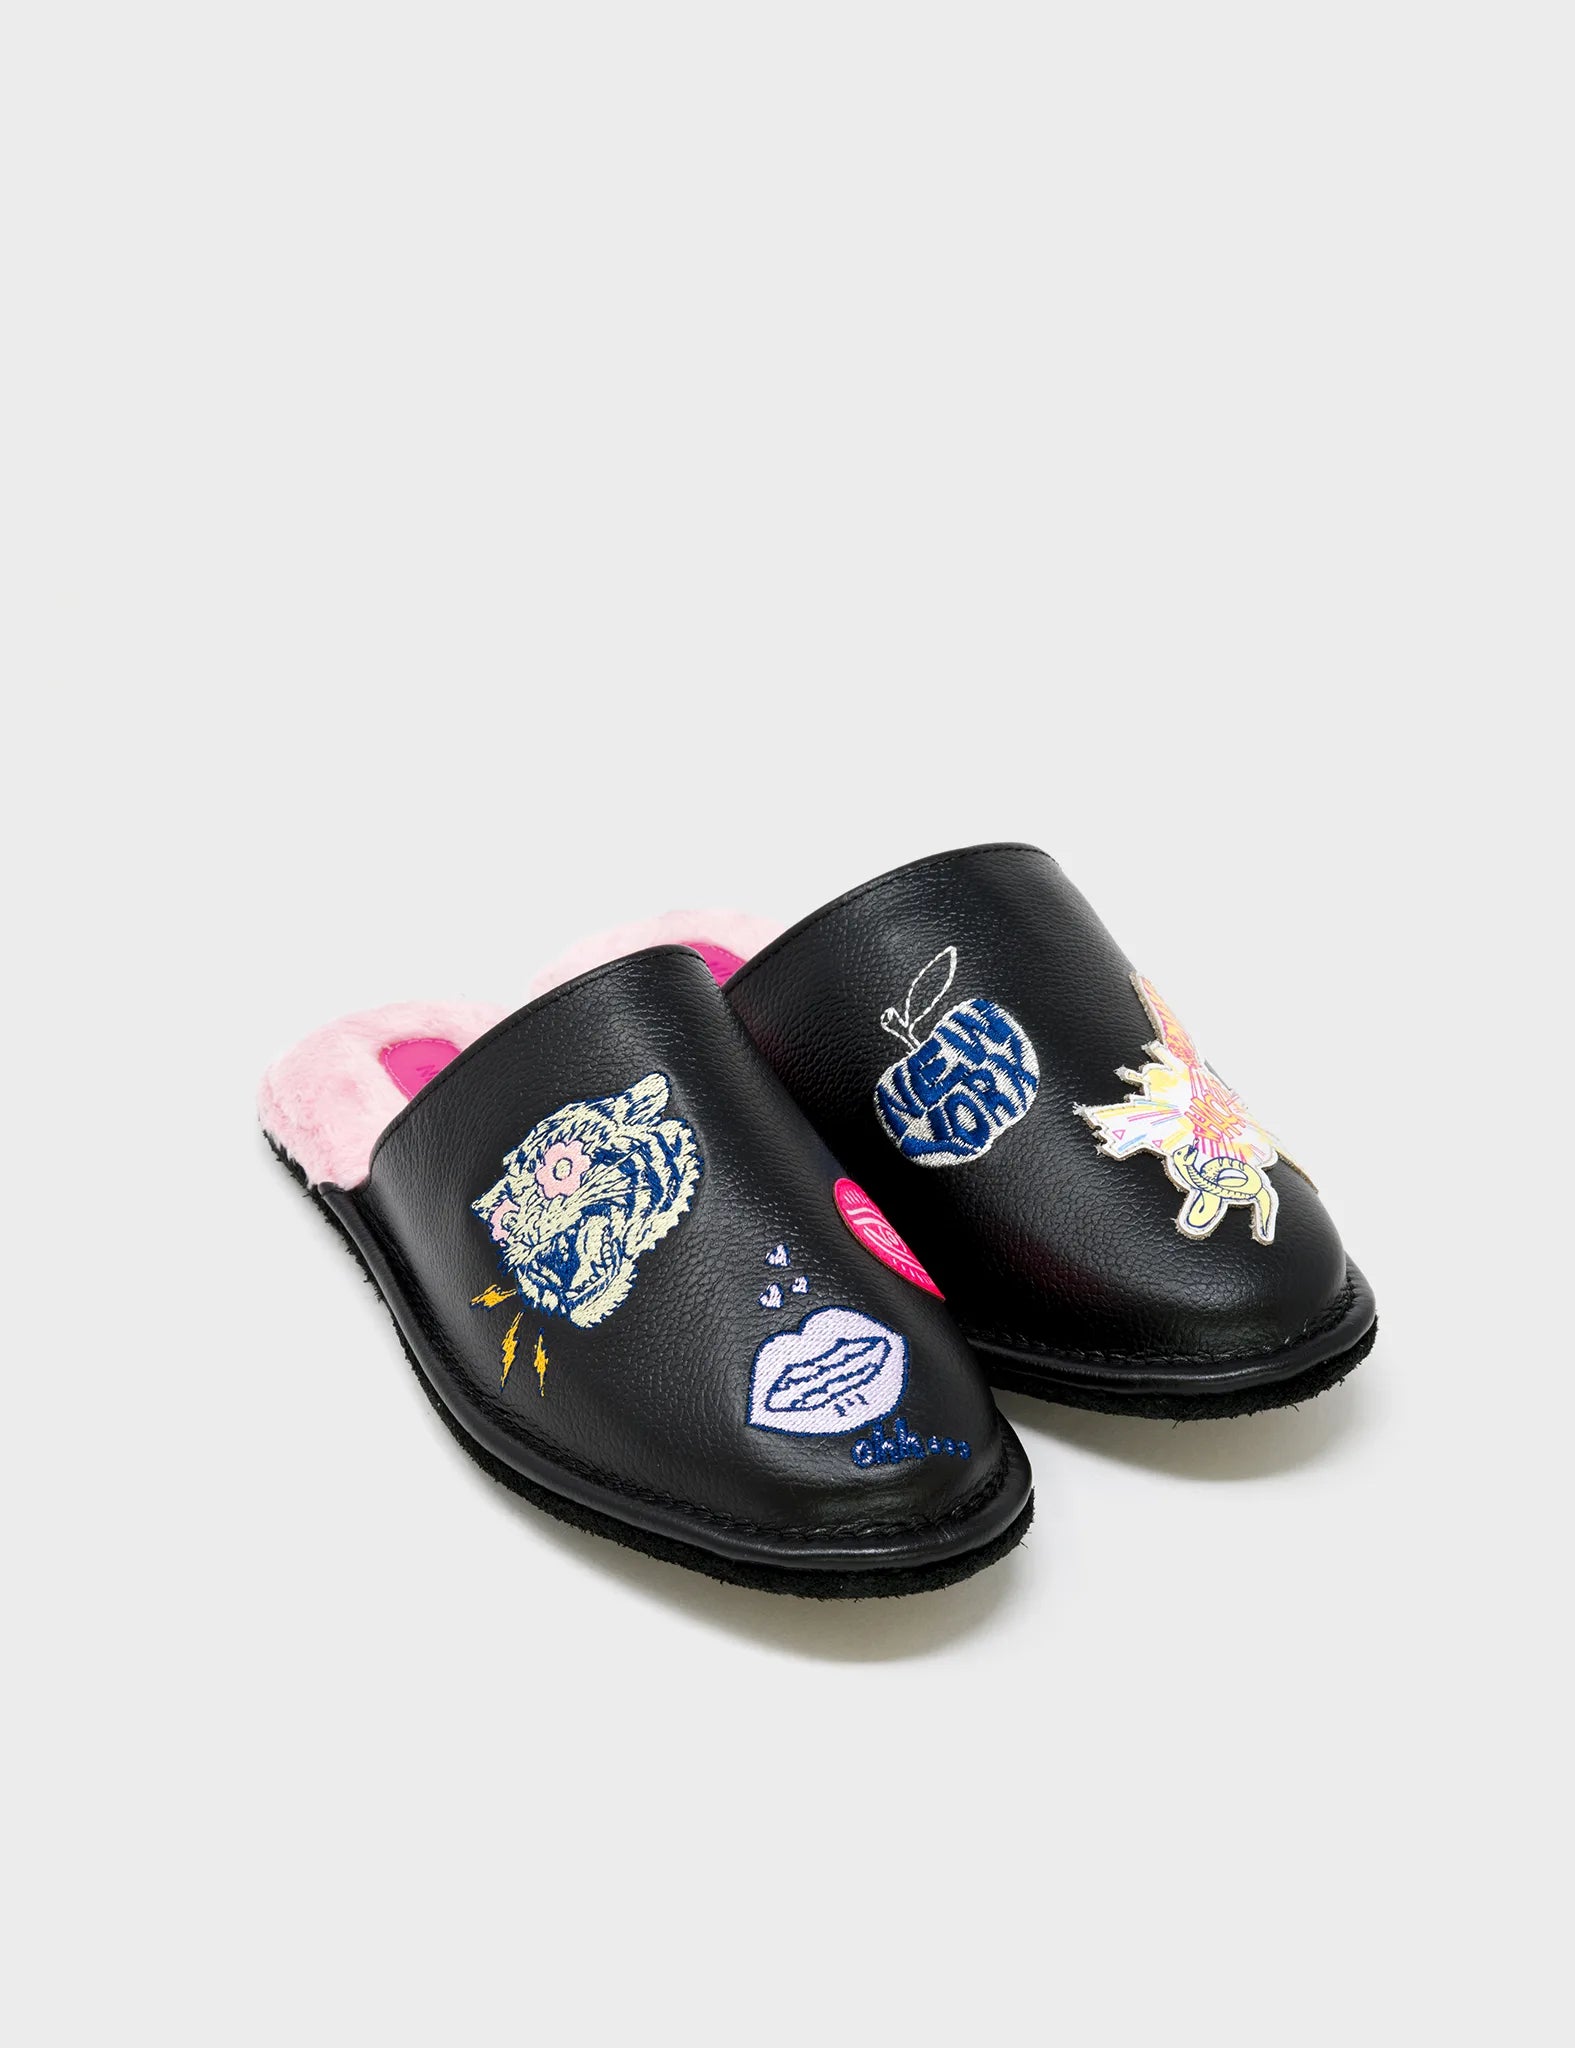  Black Leather Slippers - Tiger Power Embroidery